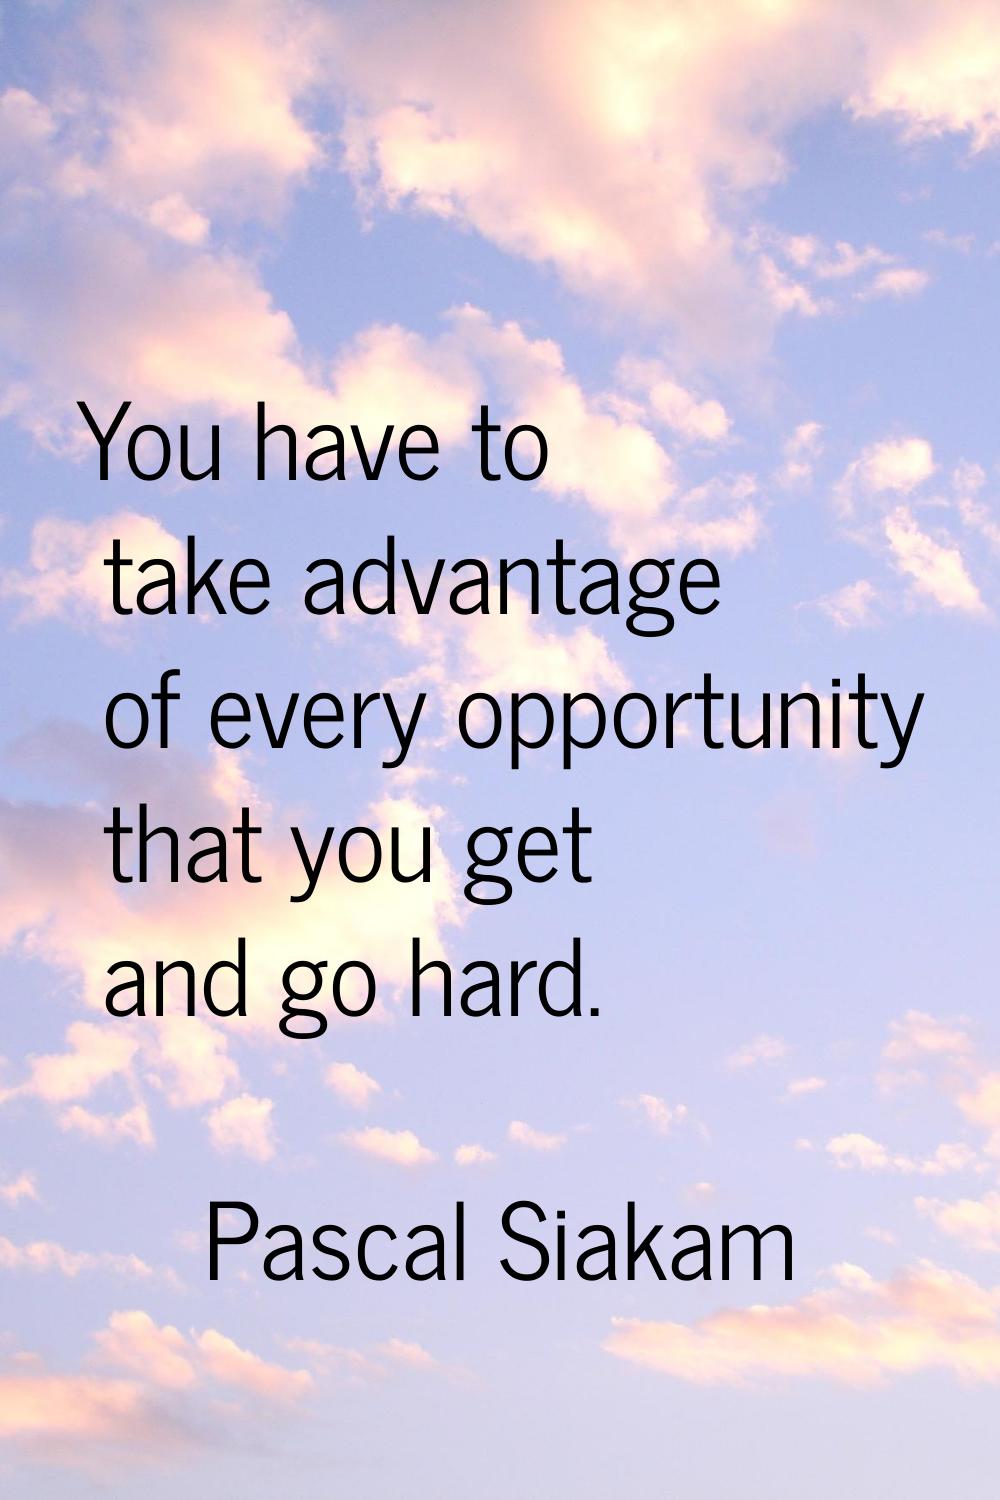 You have to take advantage of every opportunity that you get and go hard.